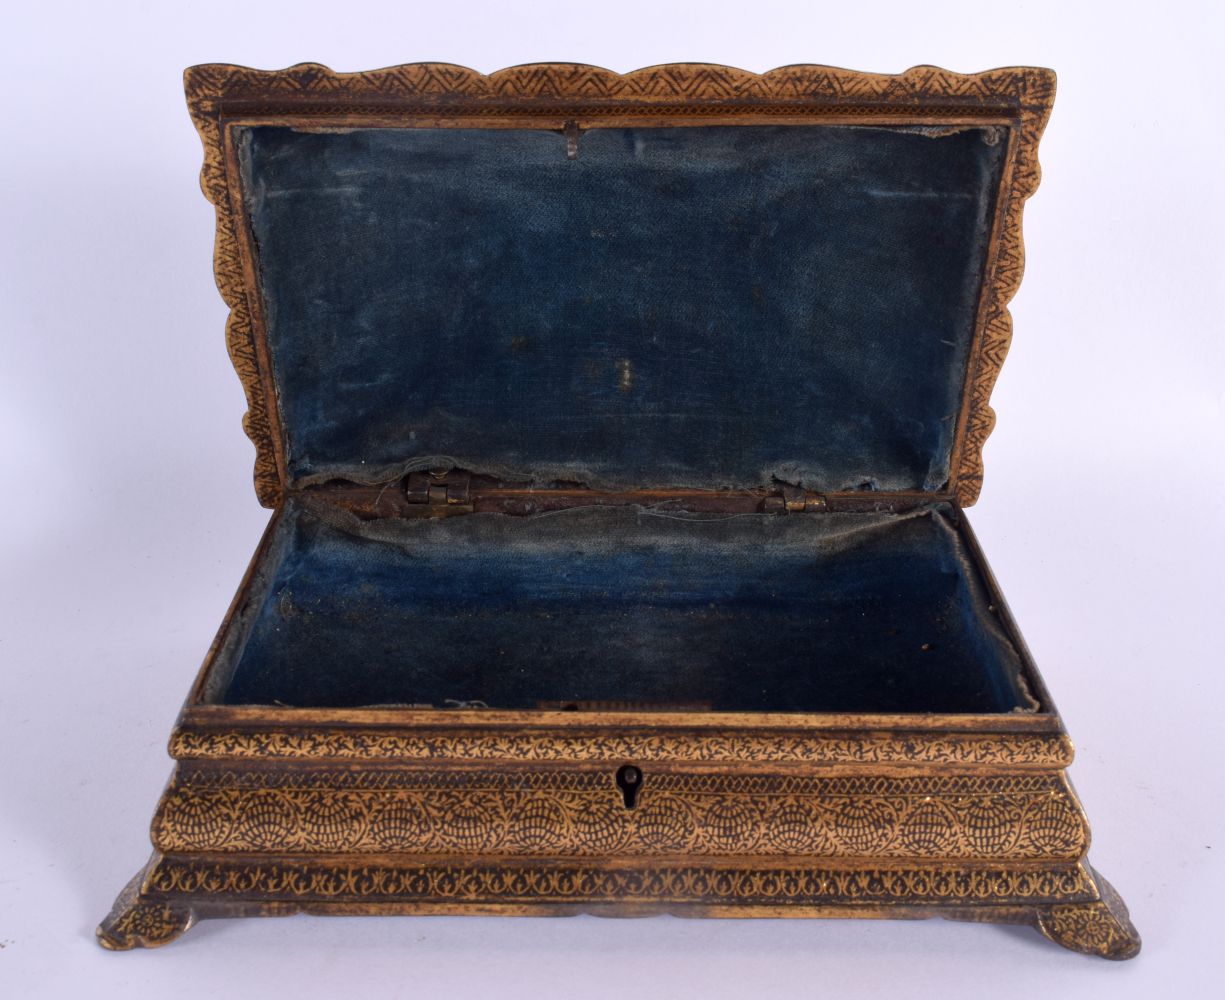 A RARE 19TH CENTURY PERSIAN TURKISH GOLD INLAID STEEL CASKET decorated all over with foliage and vin - Bild 2 aus 5